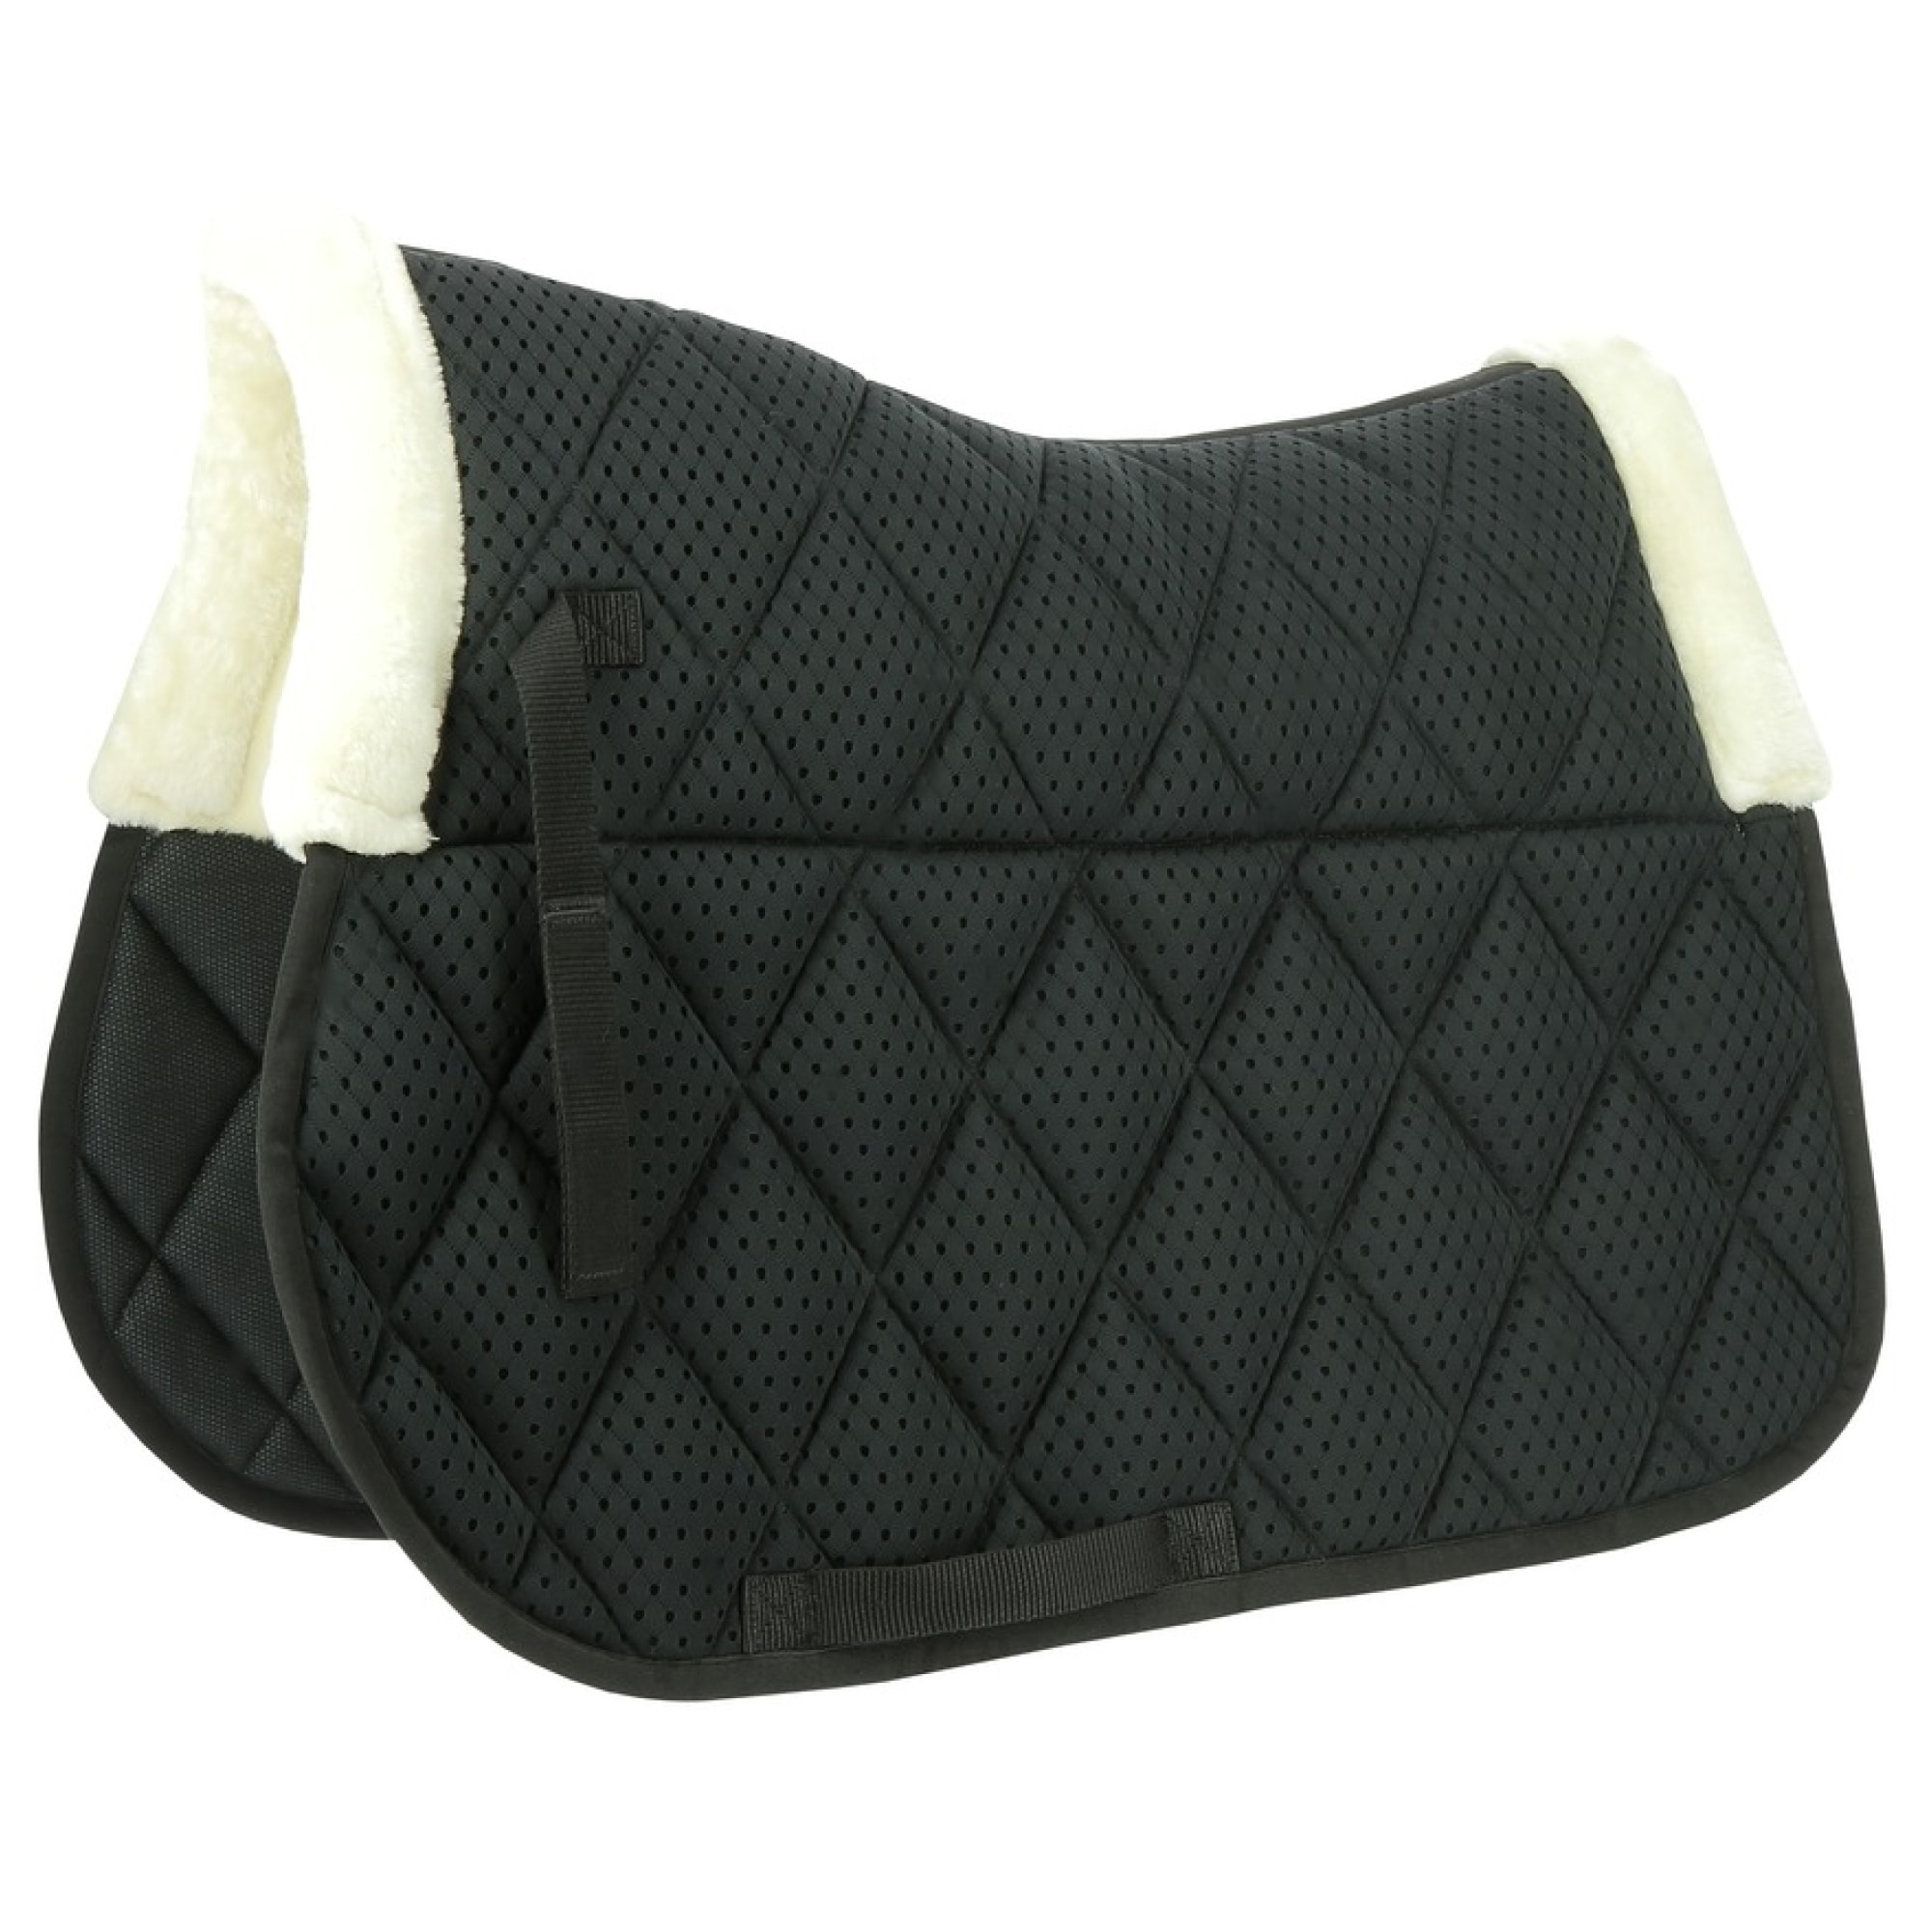 Equithème Pro air Saddle Pad - All purpose